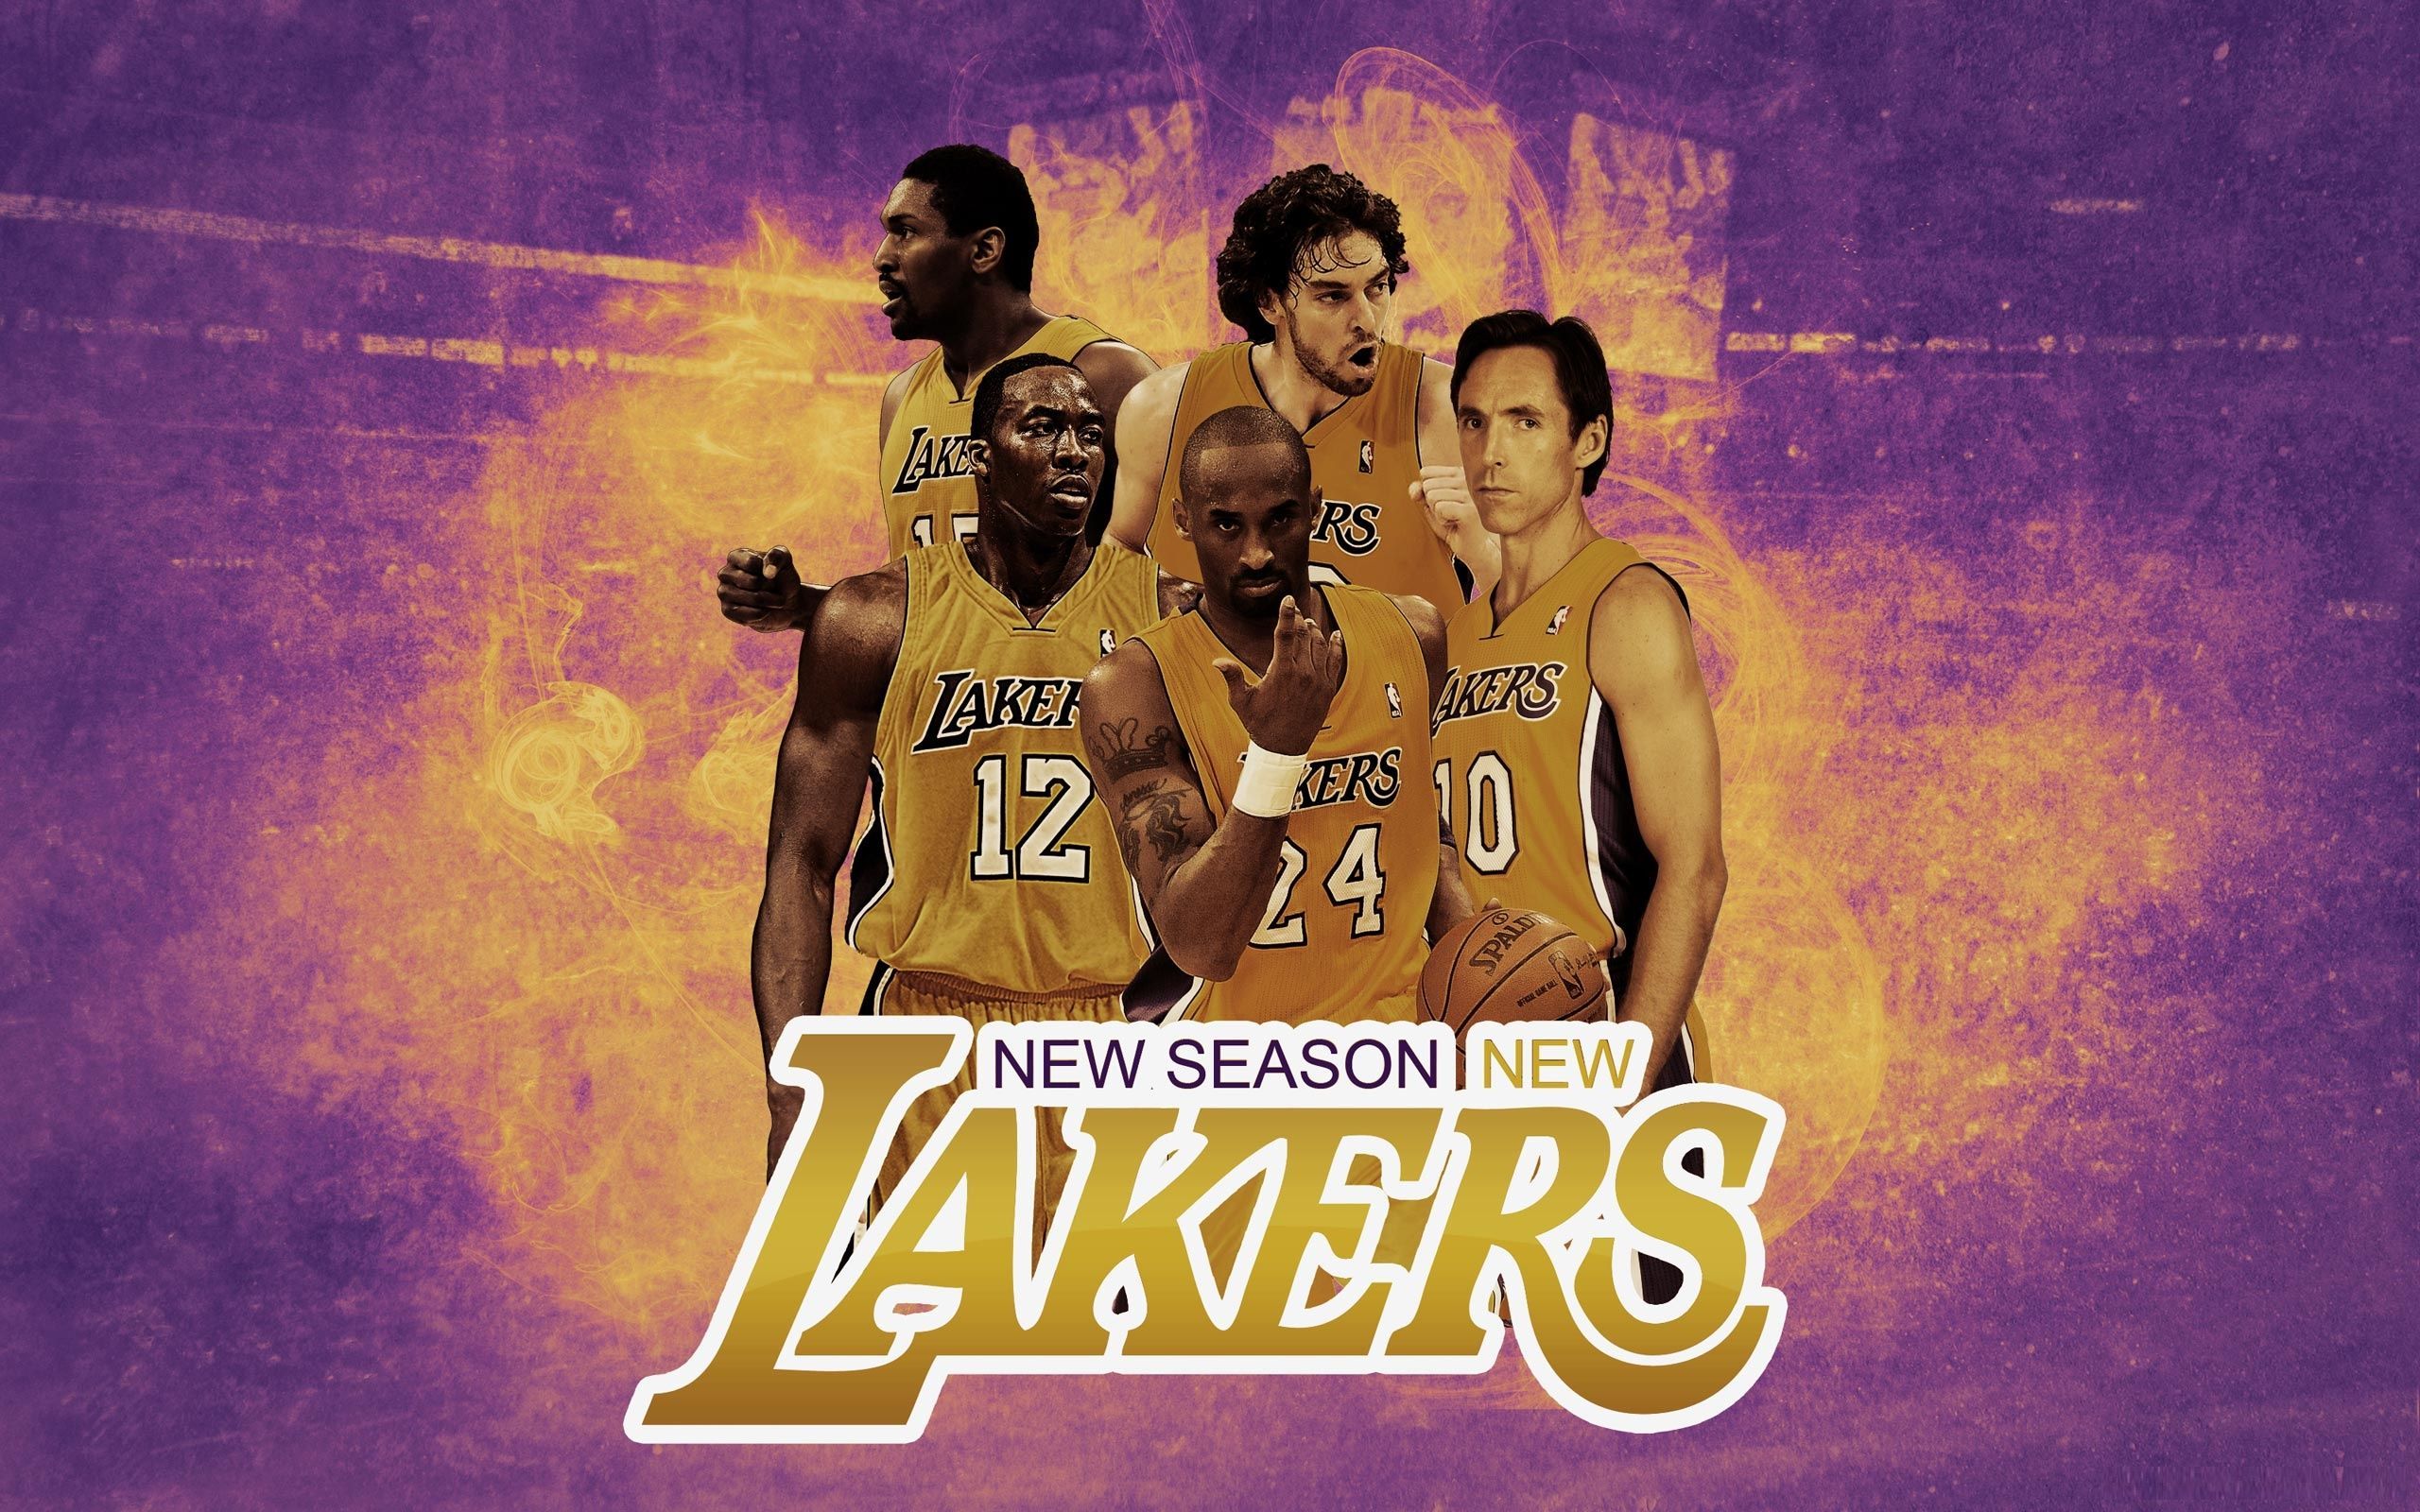 The Lakers are back and ready for a new season. - Los Angeles Lakers